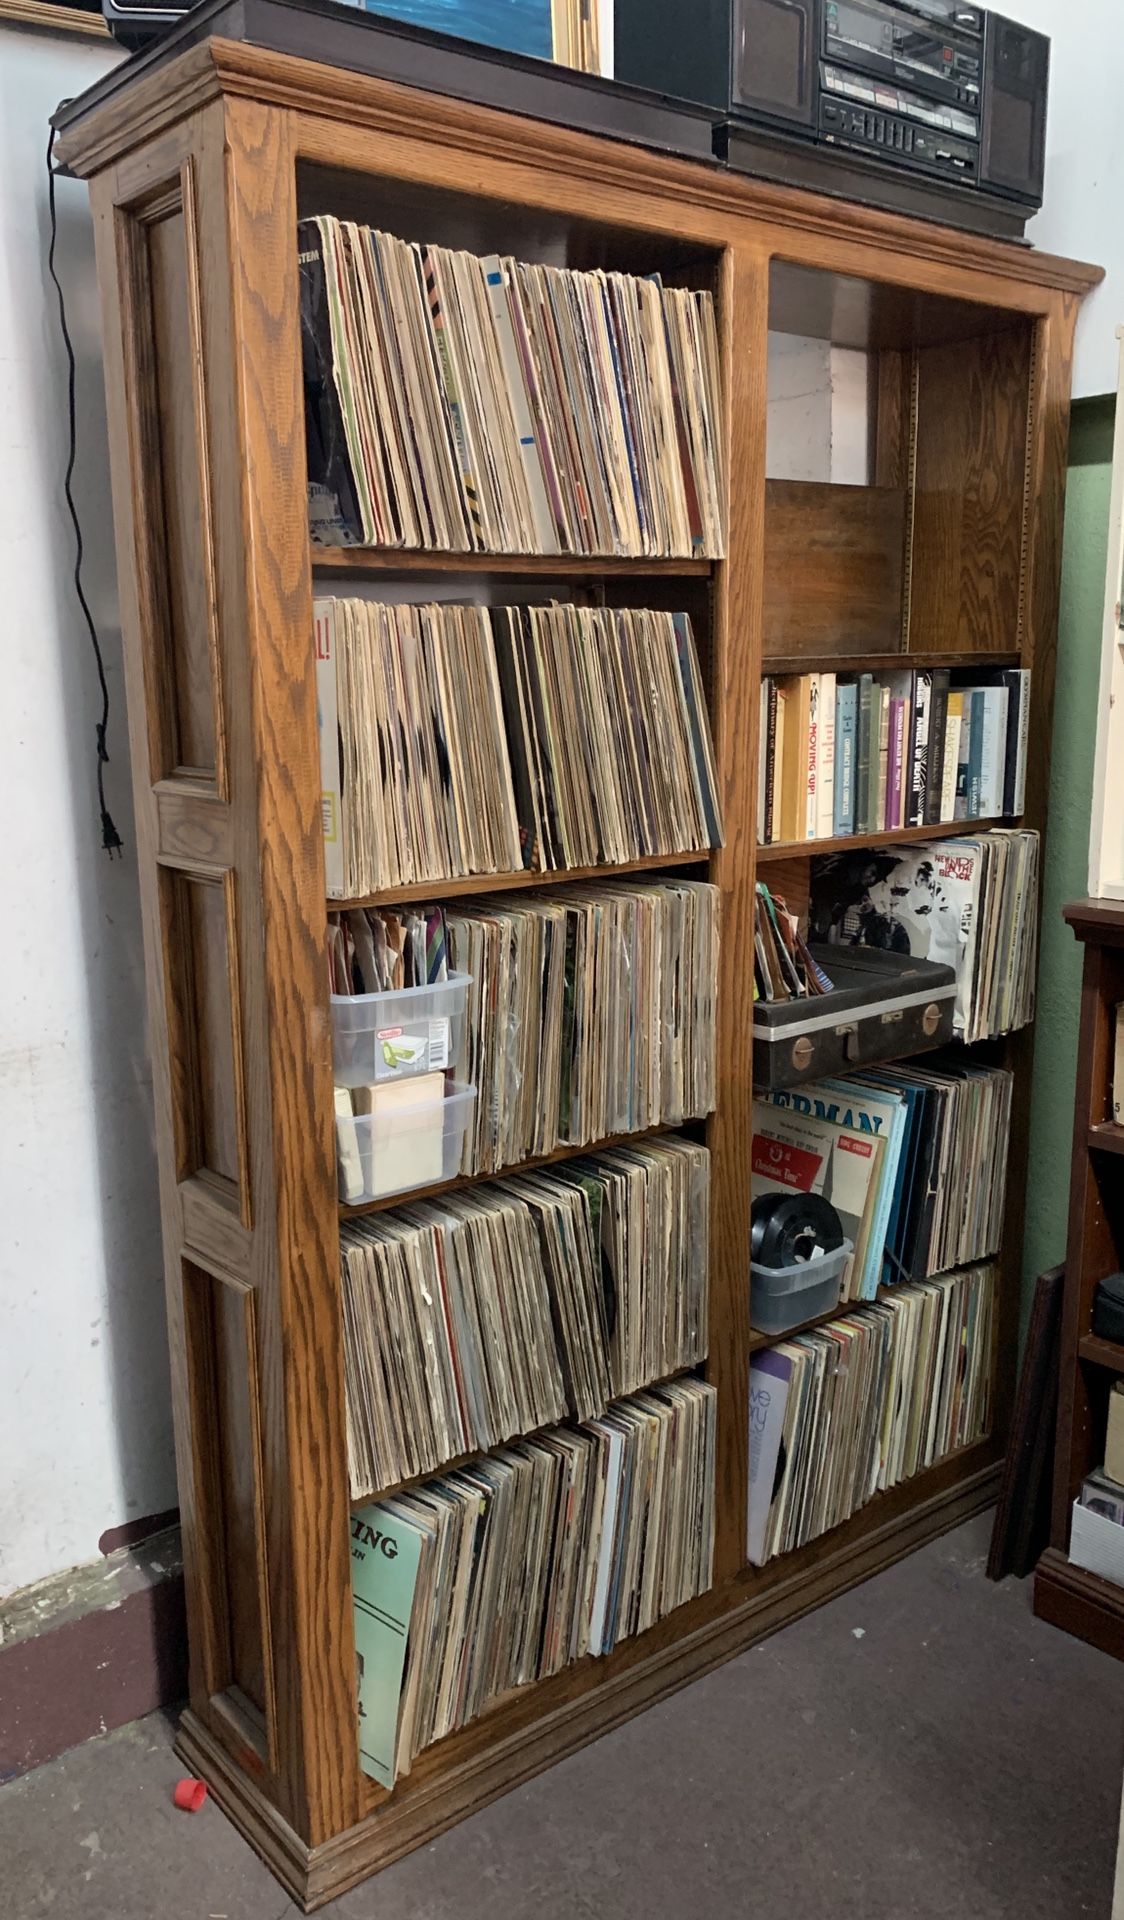 Vinyl Records For Sale, Over 400!!